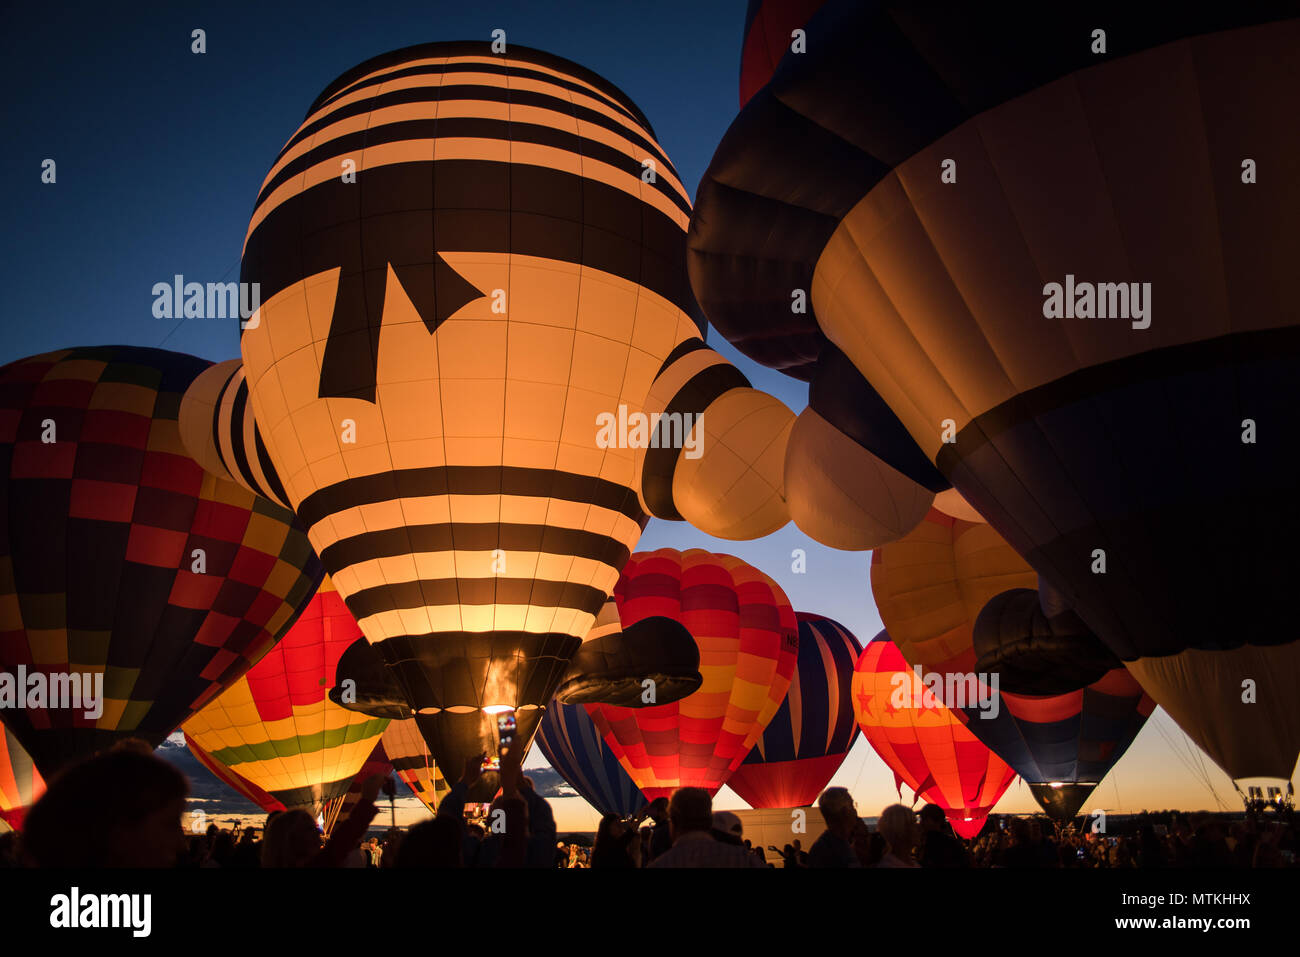 Colorful hot air balloons lit up in the night in Albuquerque, New Mexico. Stock Photo